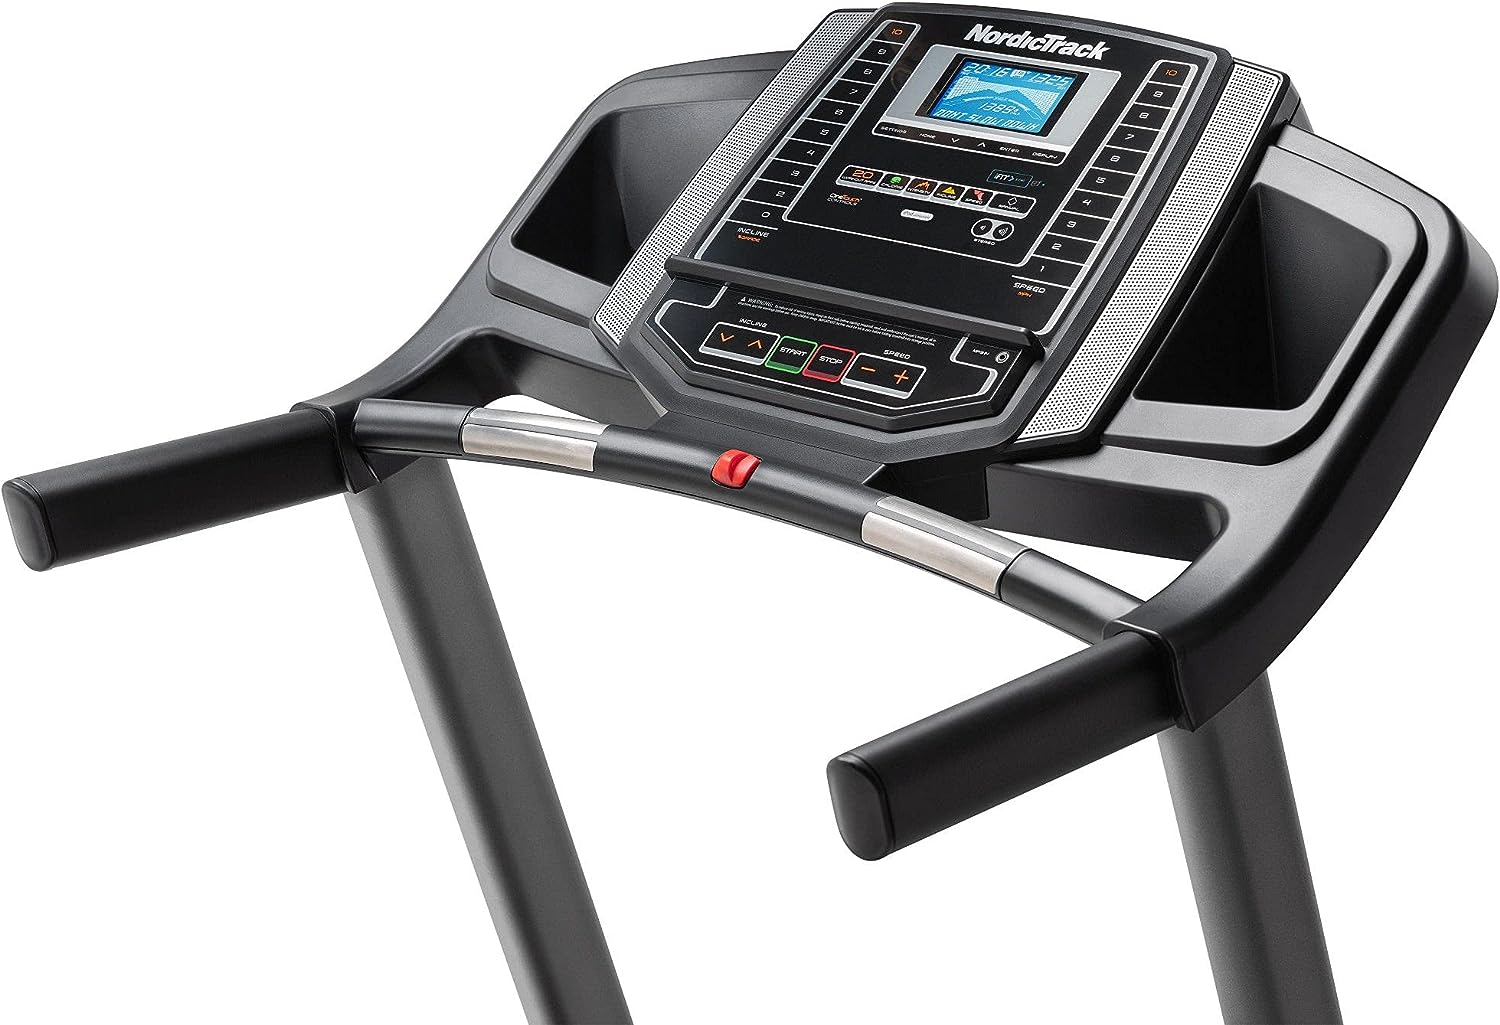 NordicTrack T Series Treadmill Review